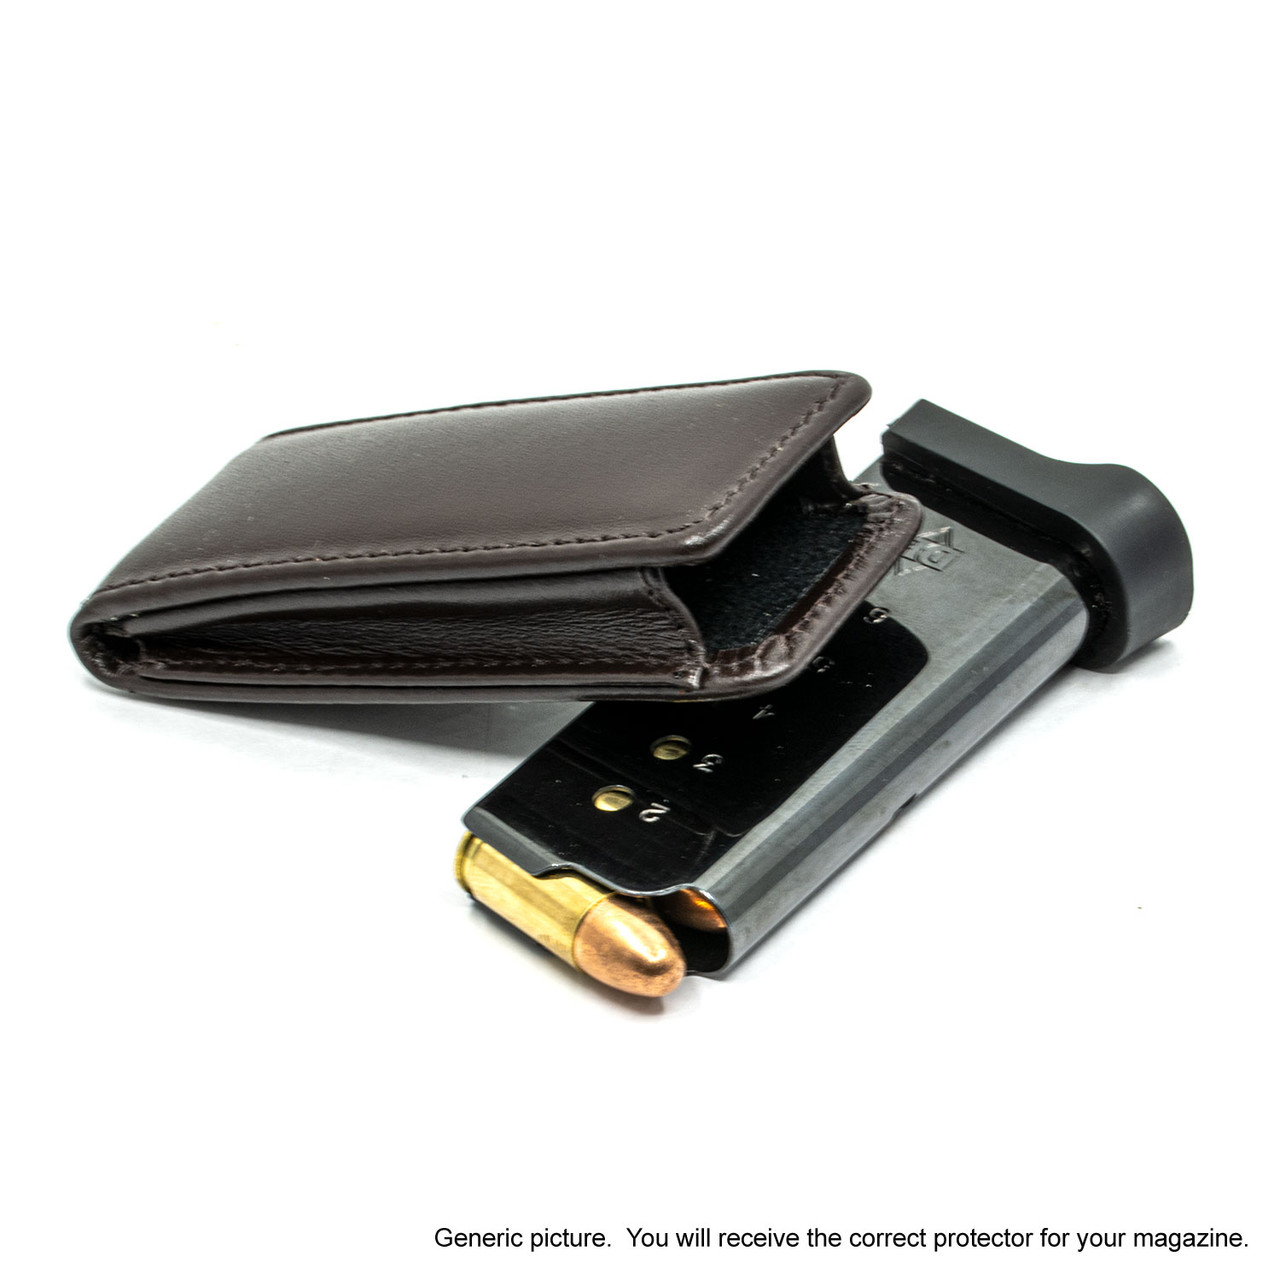 CZ 75 P-01 Brown Leather Magazine Pocket Protector